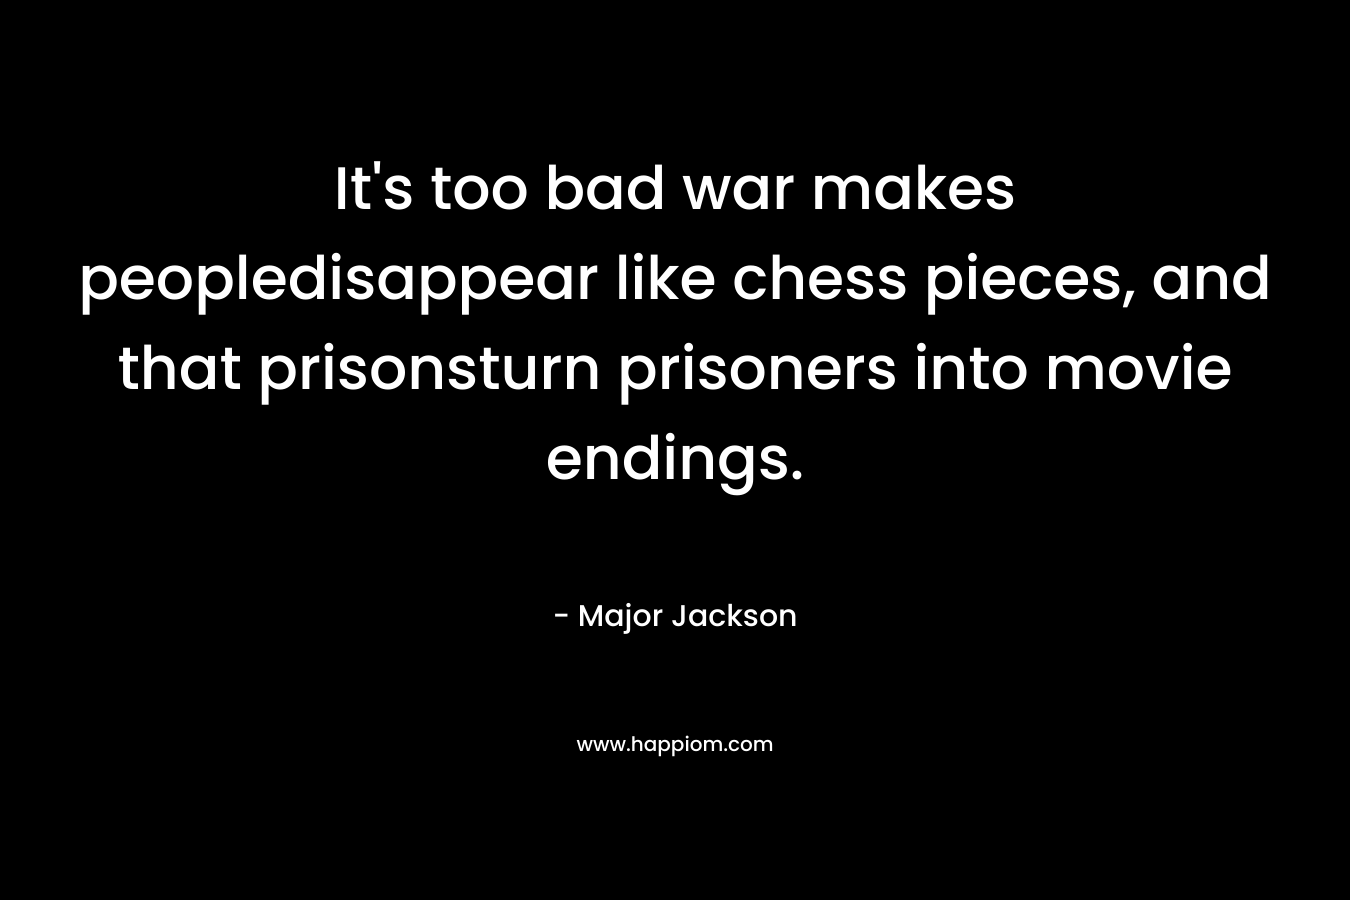 It’s too bad war makes peopledisappear like chess pieces, and that prisonsturn prisoners into movie endings. – Major Jackson